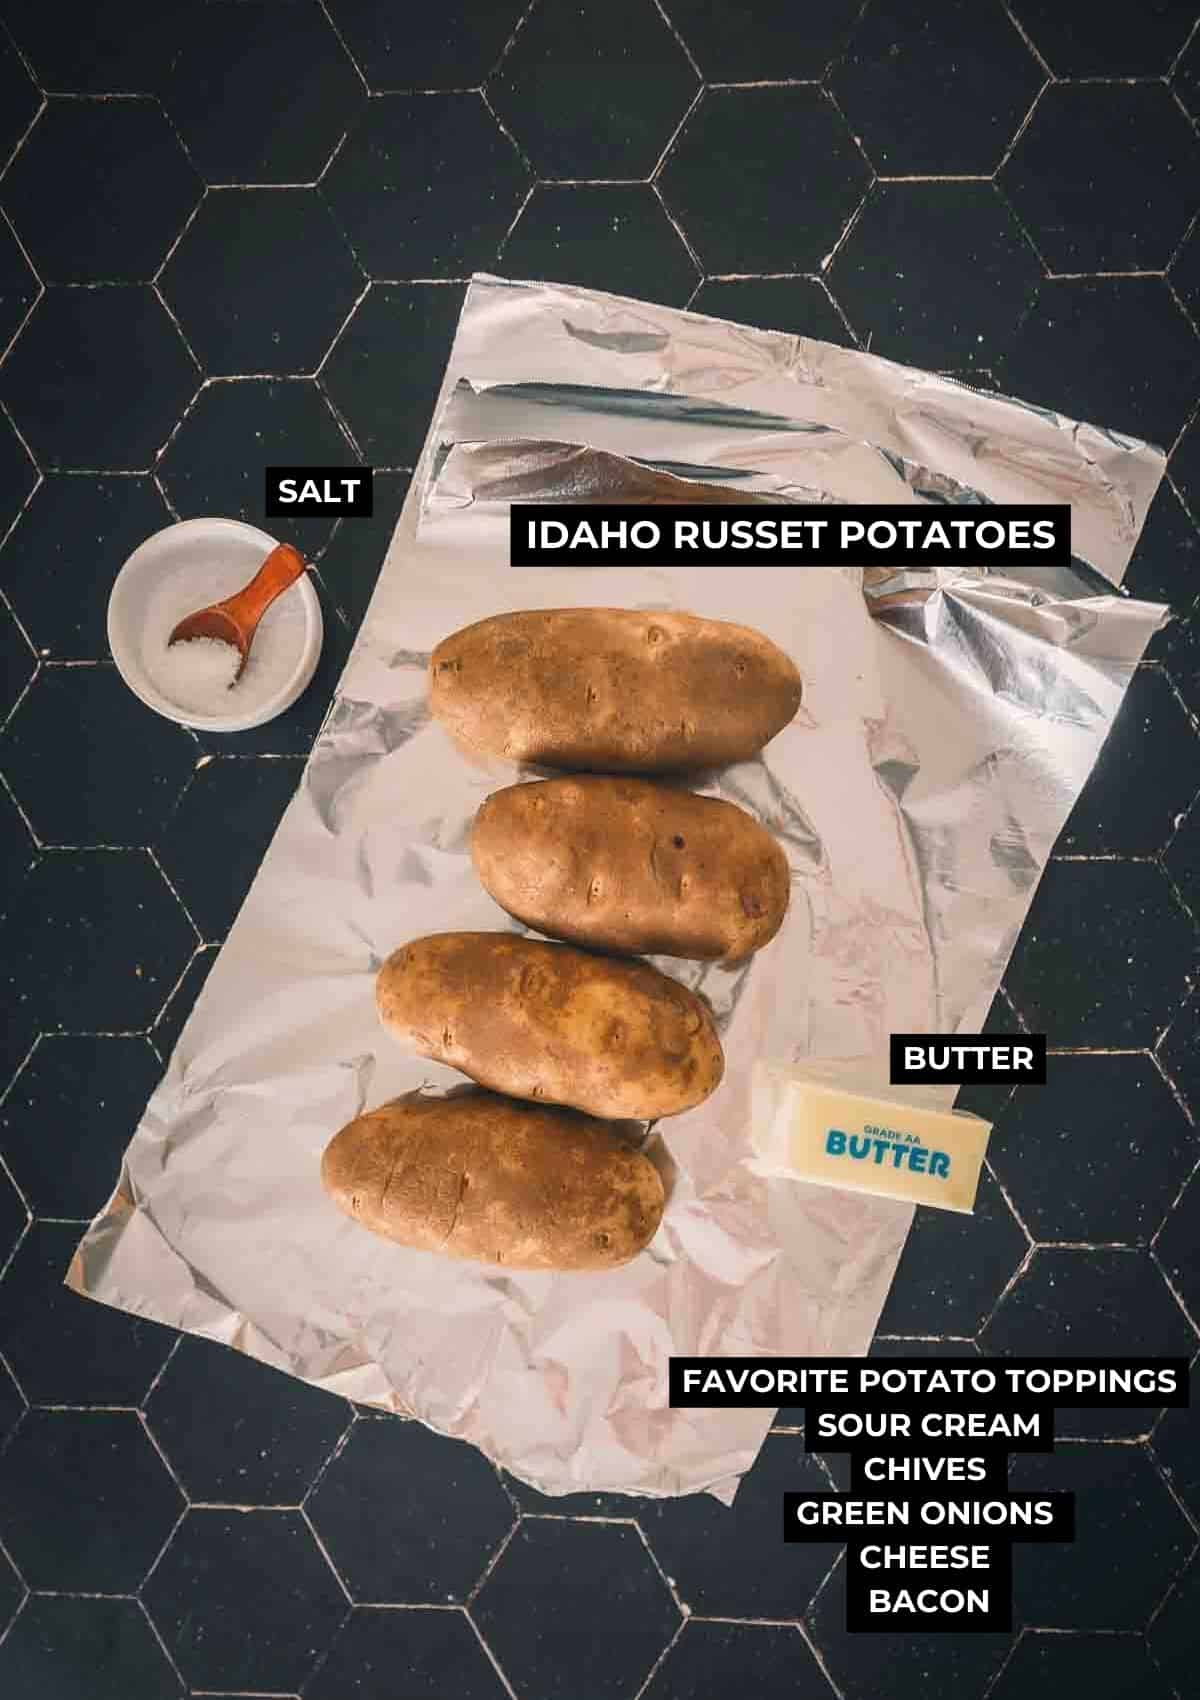 Ingredients for foil wrapped baked potatoes.